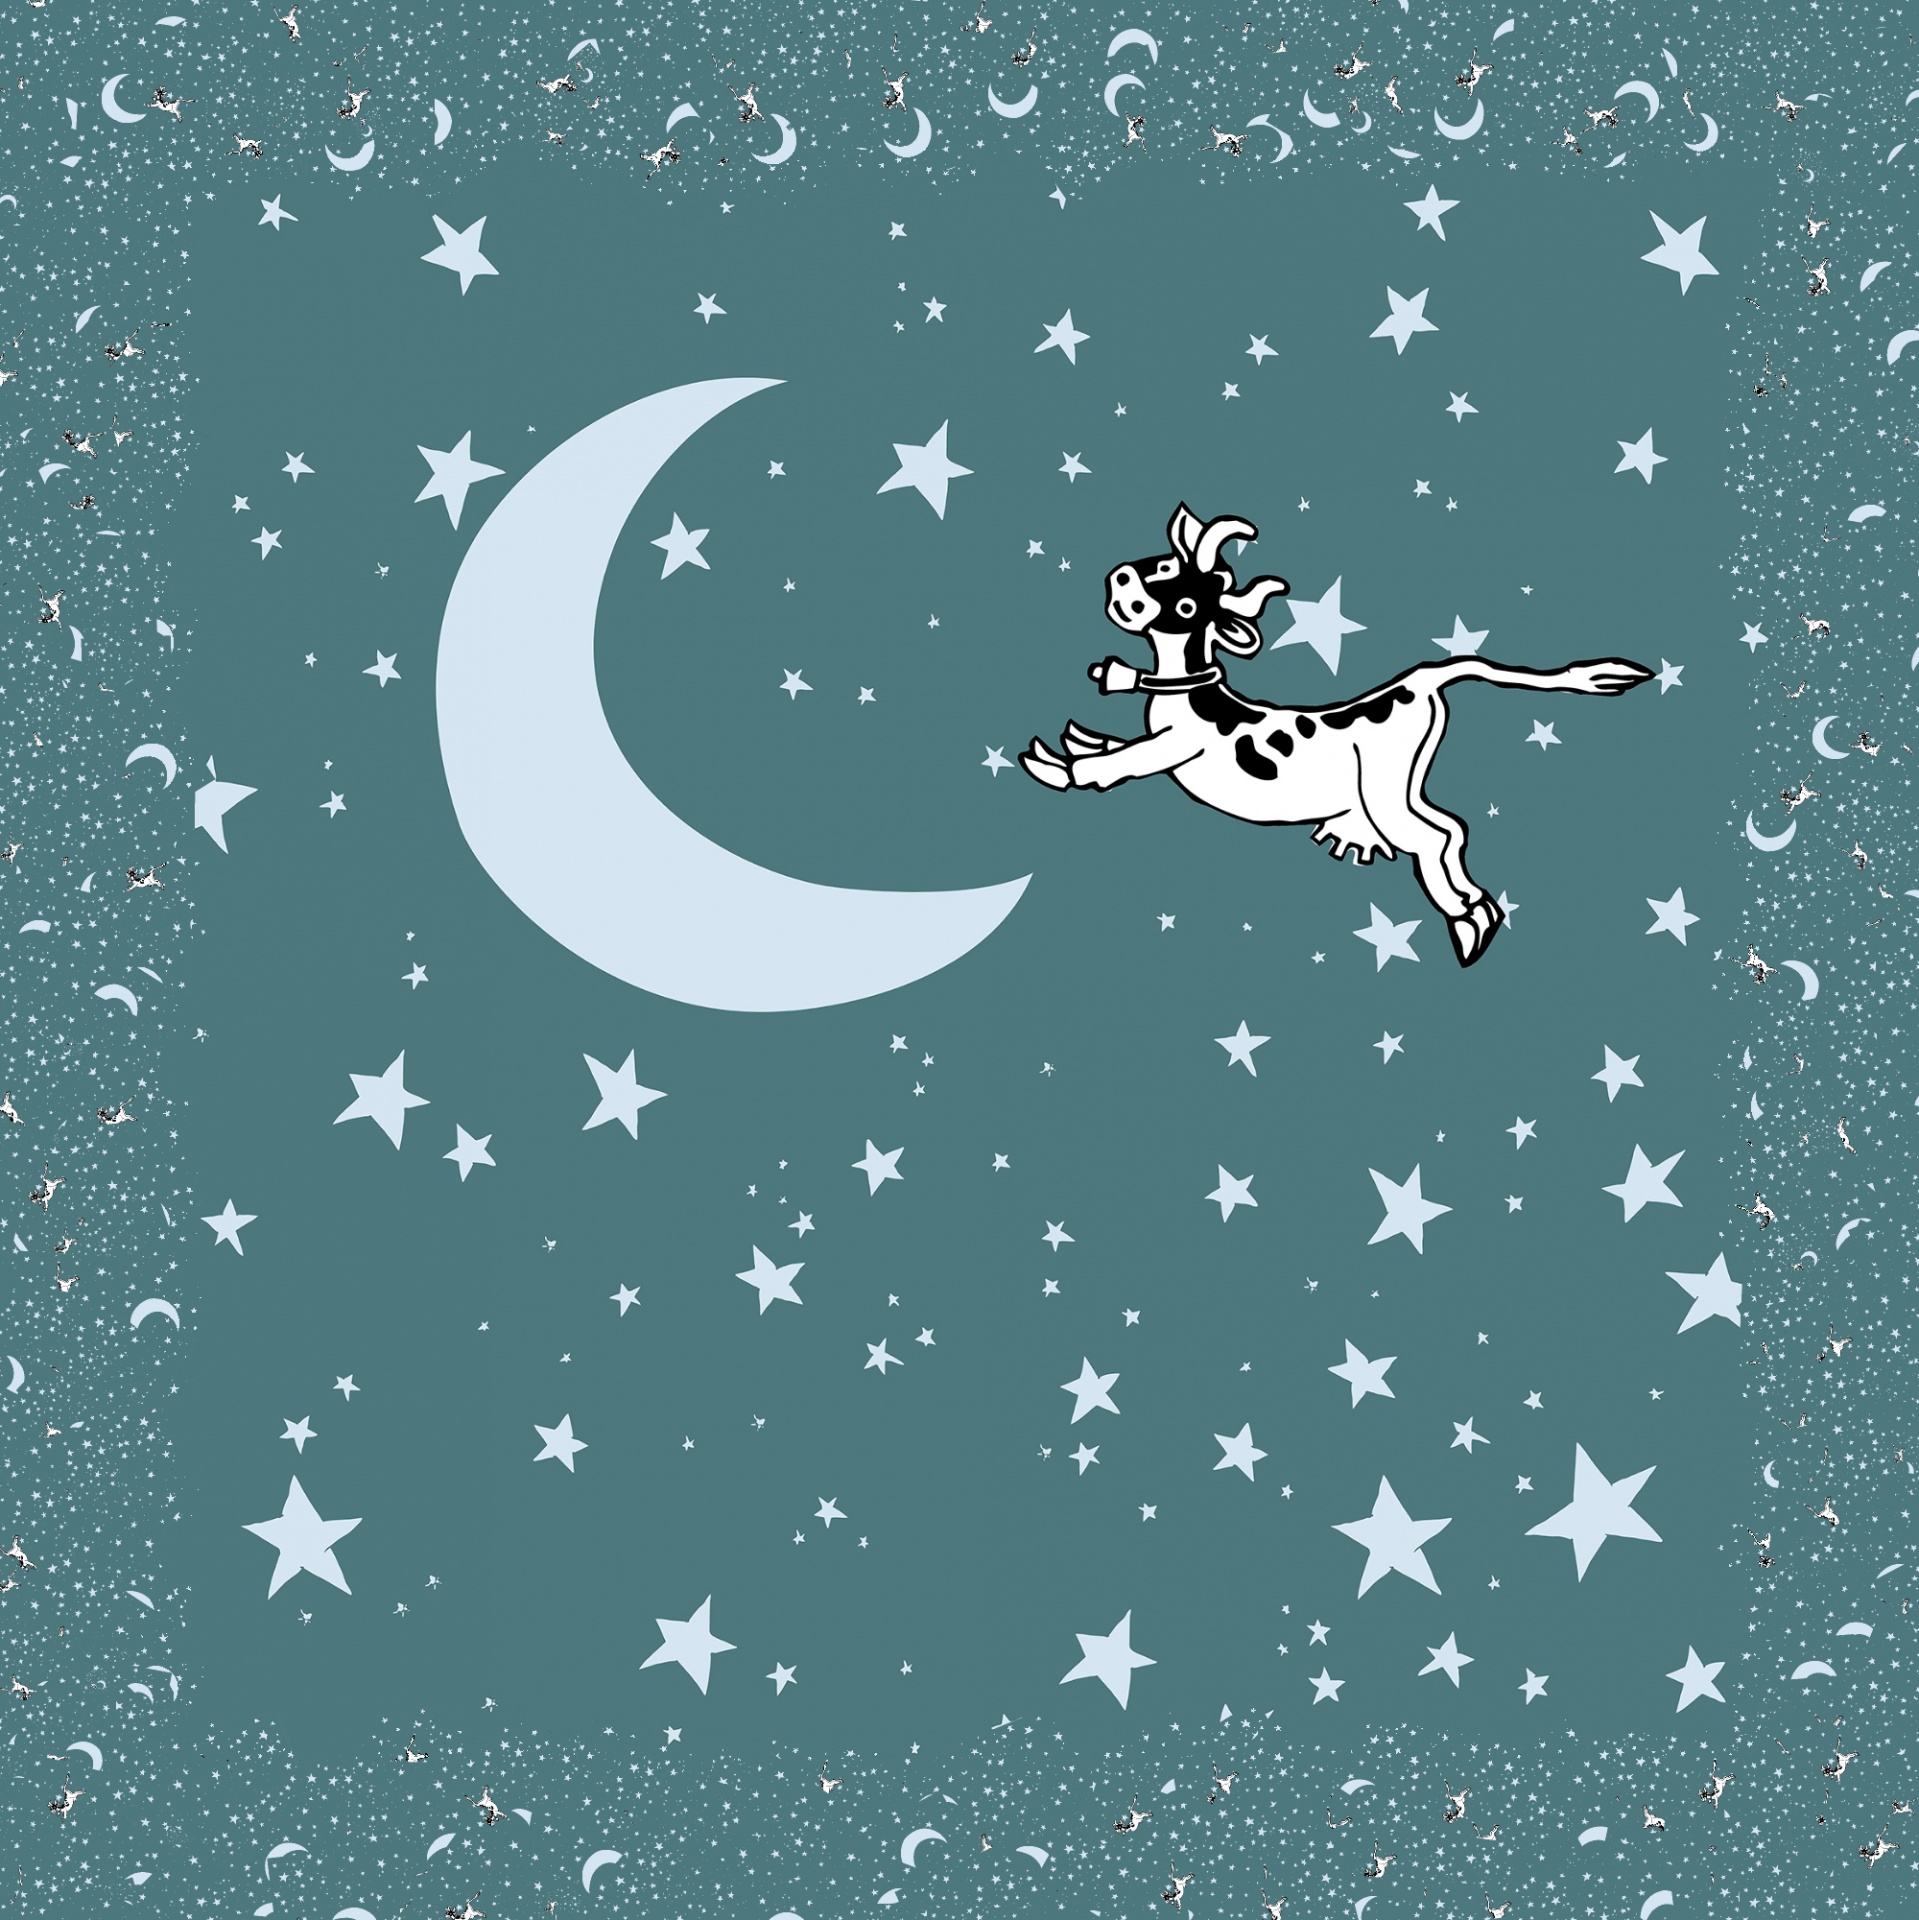 cartoon of a cow jumping over the moon - blue turquoise color